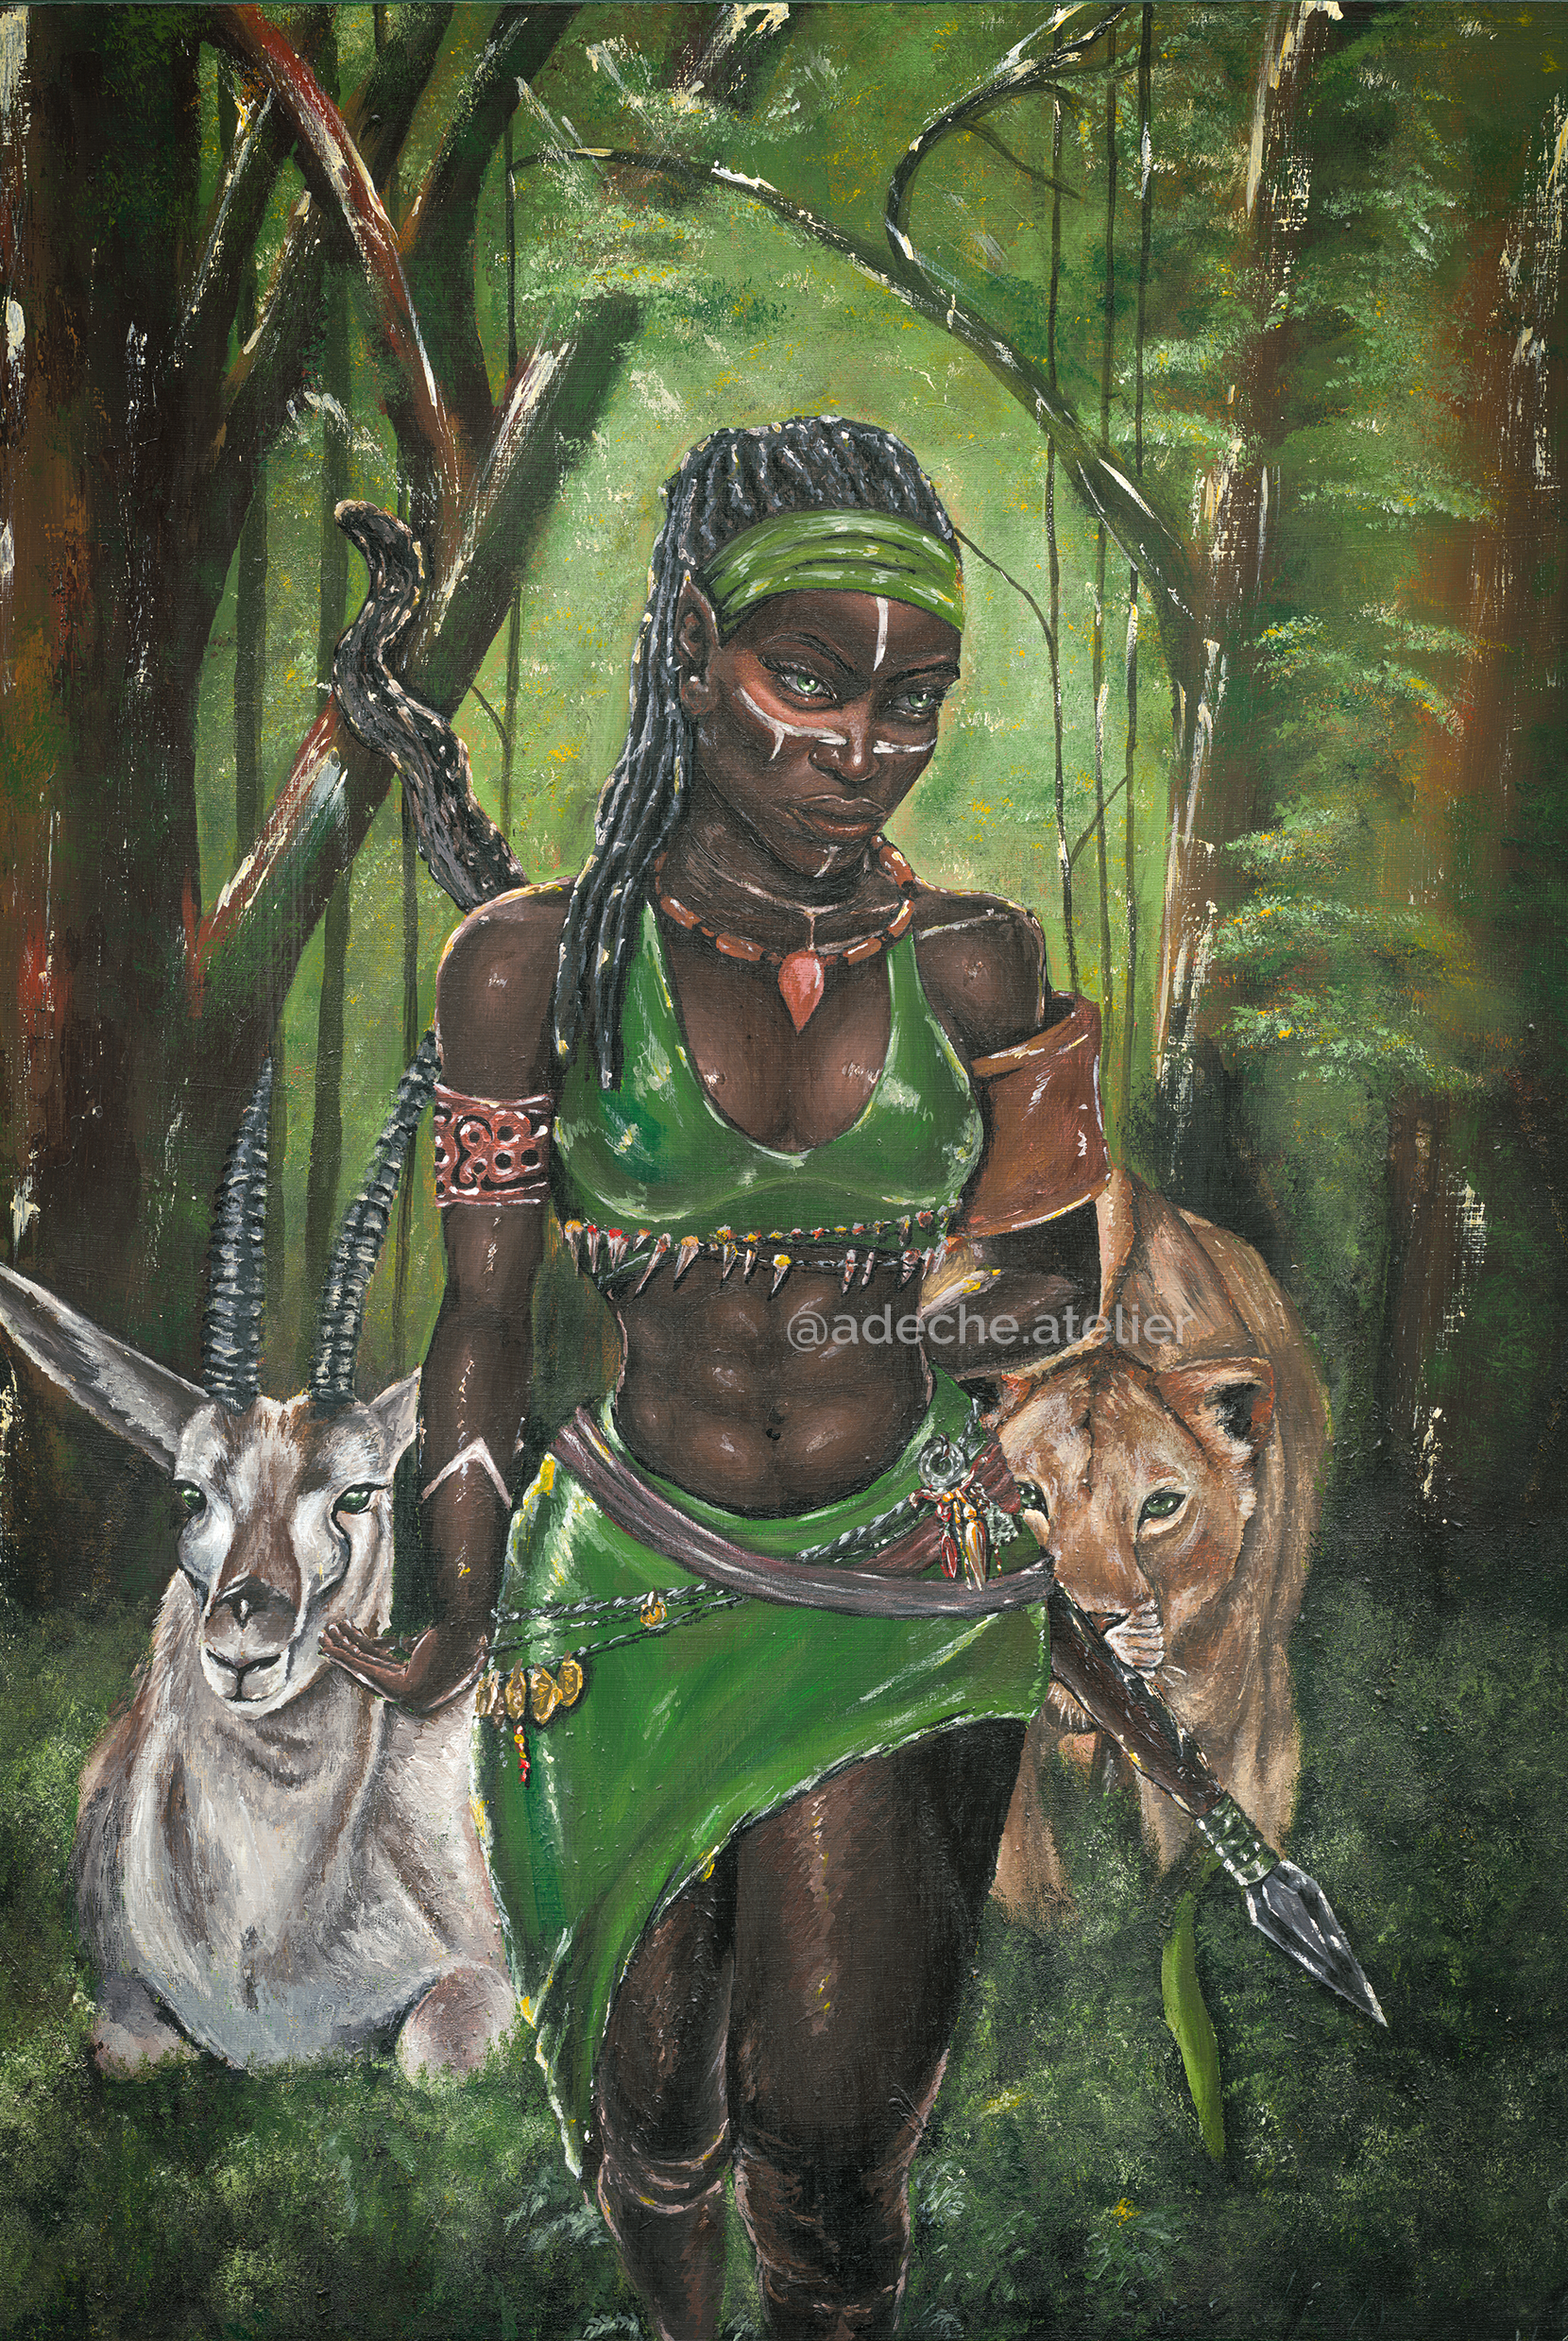 Ajá Art Print on high-quality matte or velvet paper, framed in gallery black, white, or natural maple, depicting Yoruba Orisa who is the soul of the forest and the animals within it.